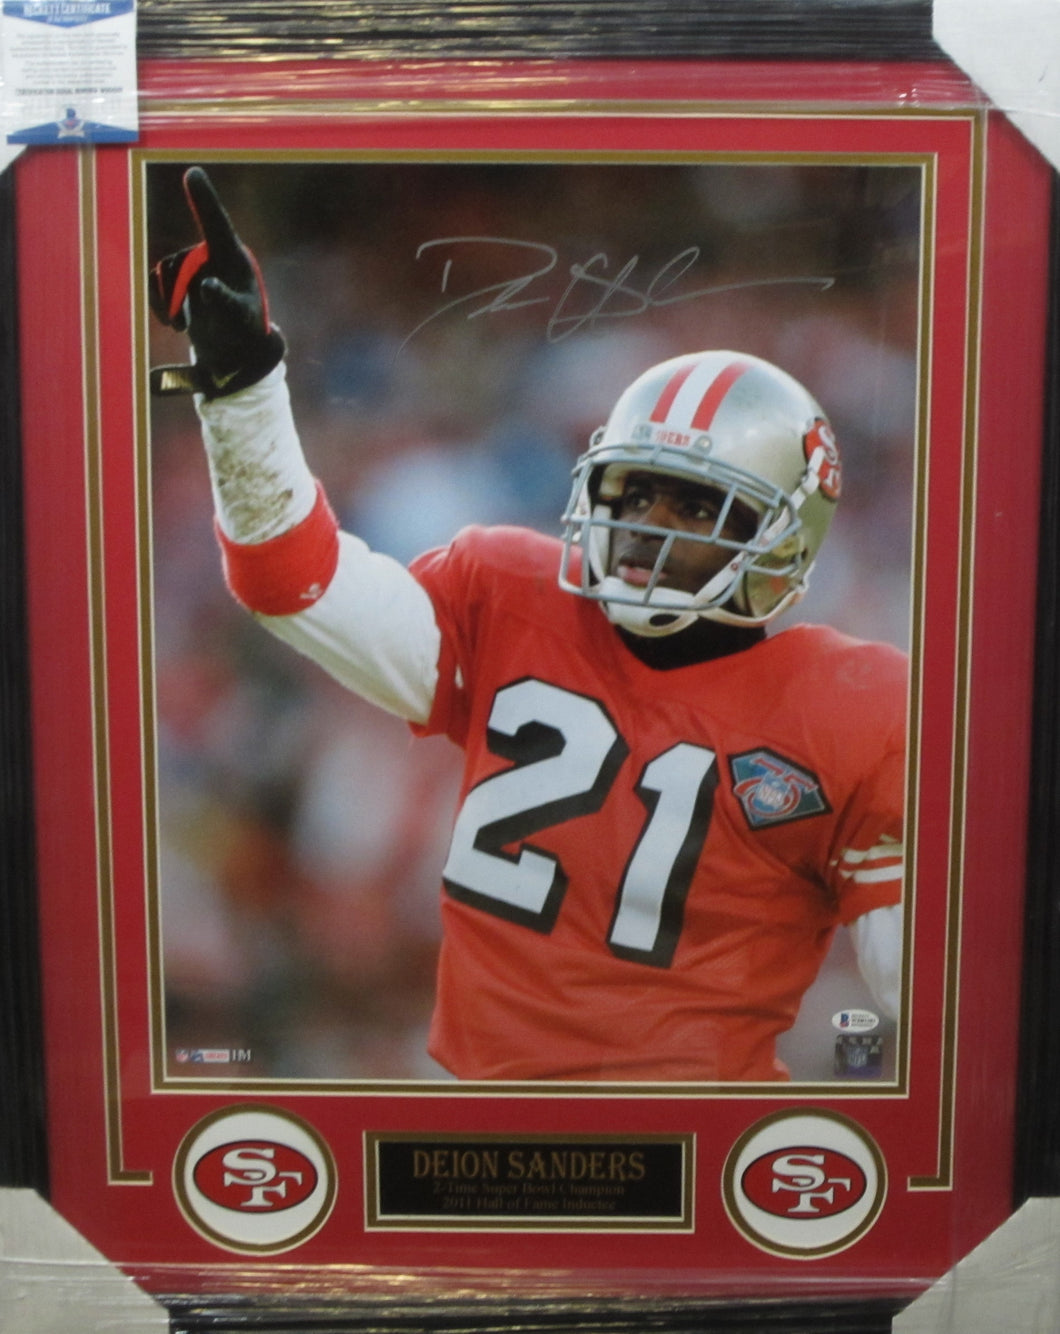 San Francisco 49ers Deion Sanders SIGNED Framed Matted 16x20 Photo With BECKETT COA